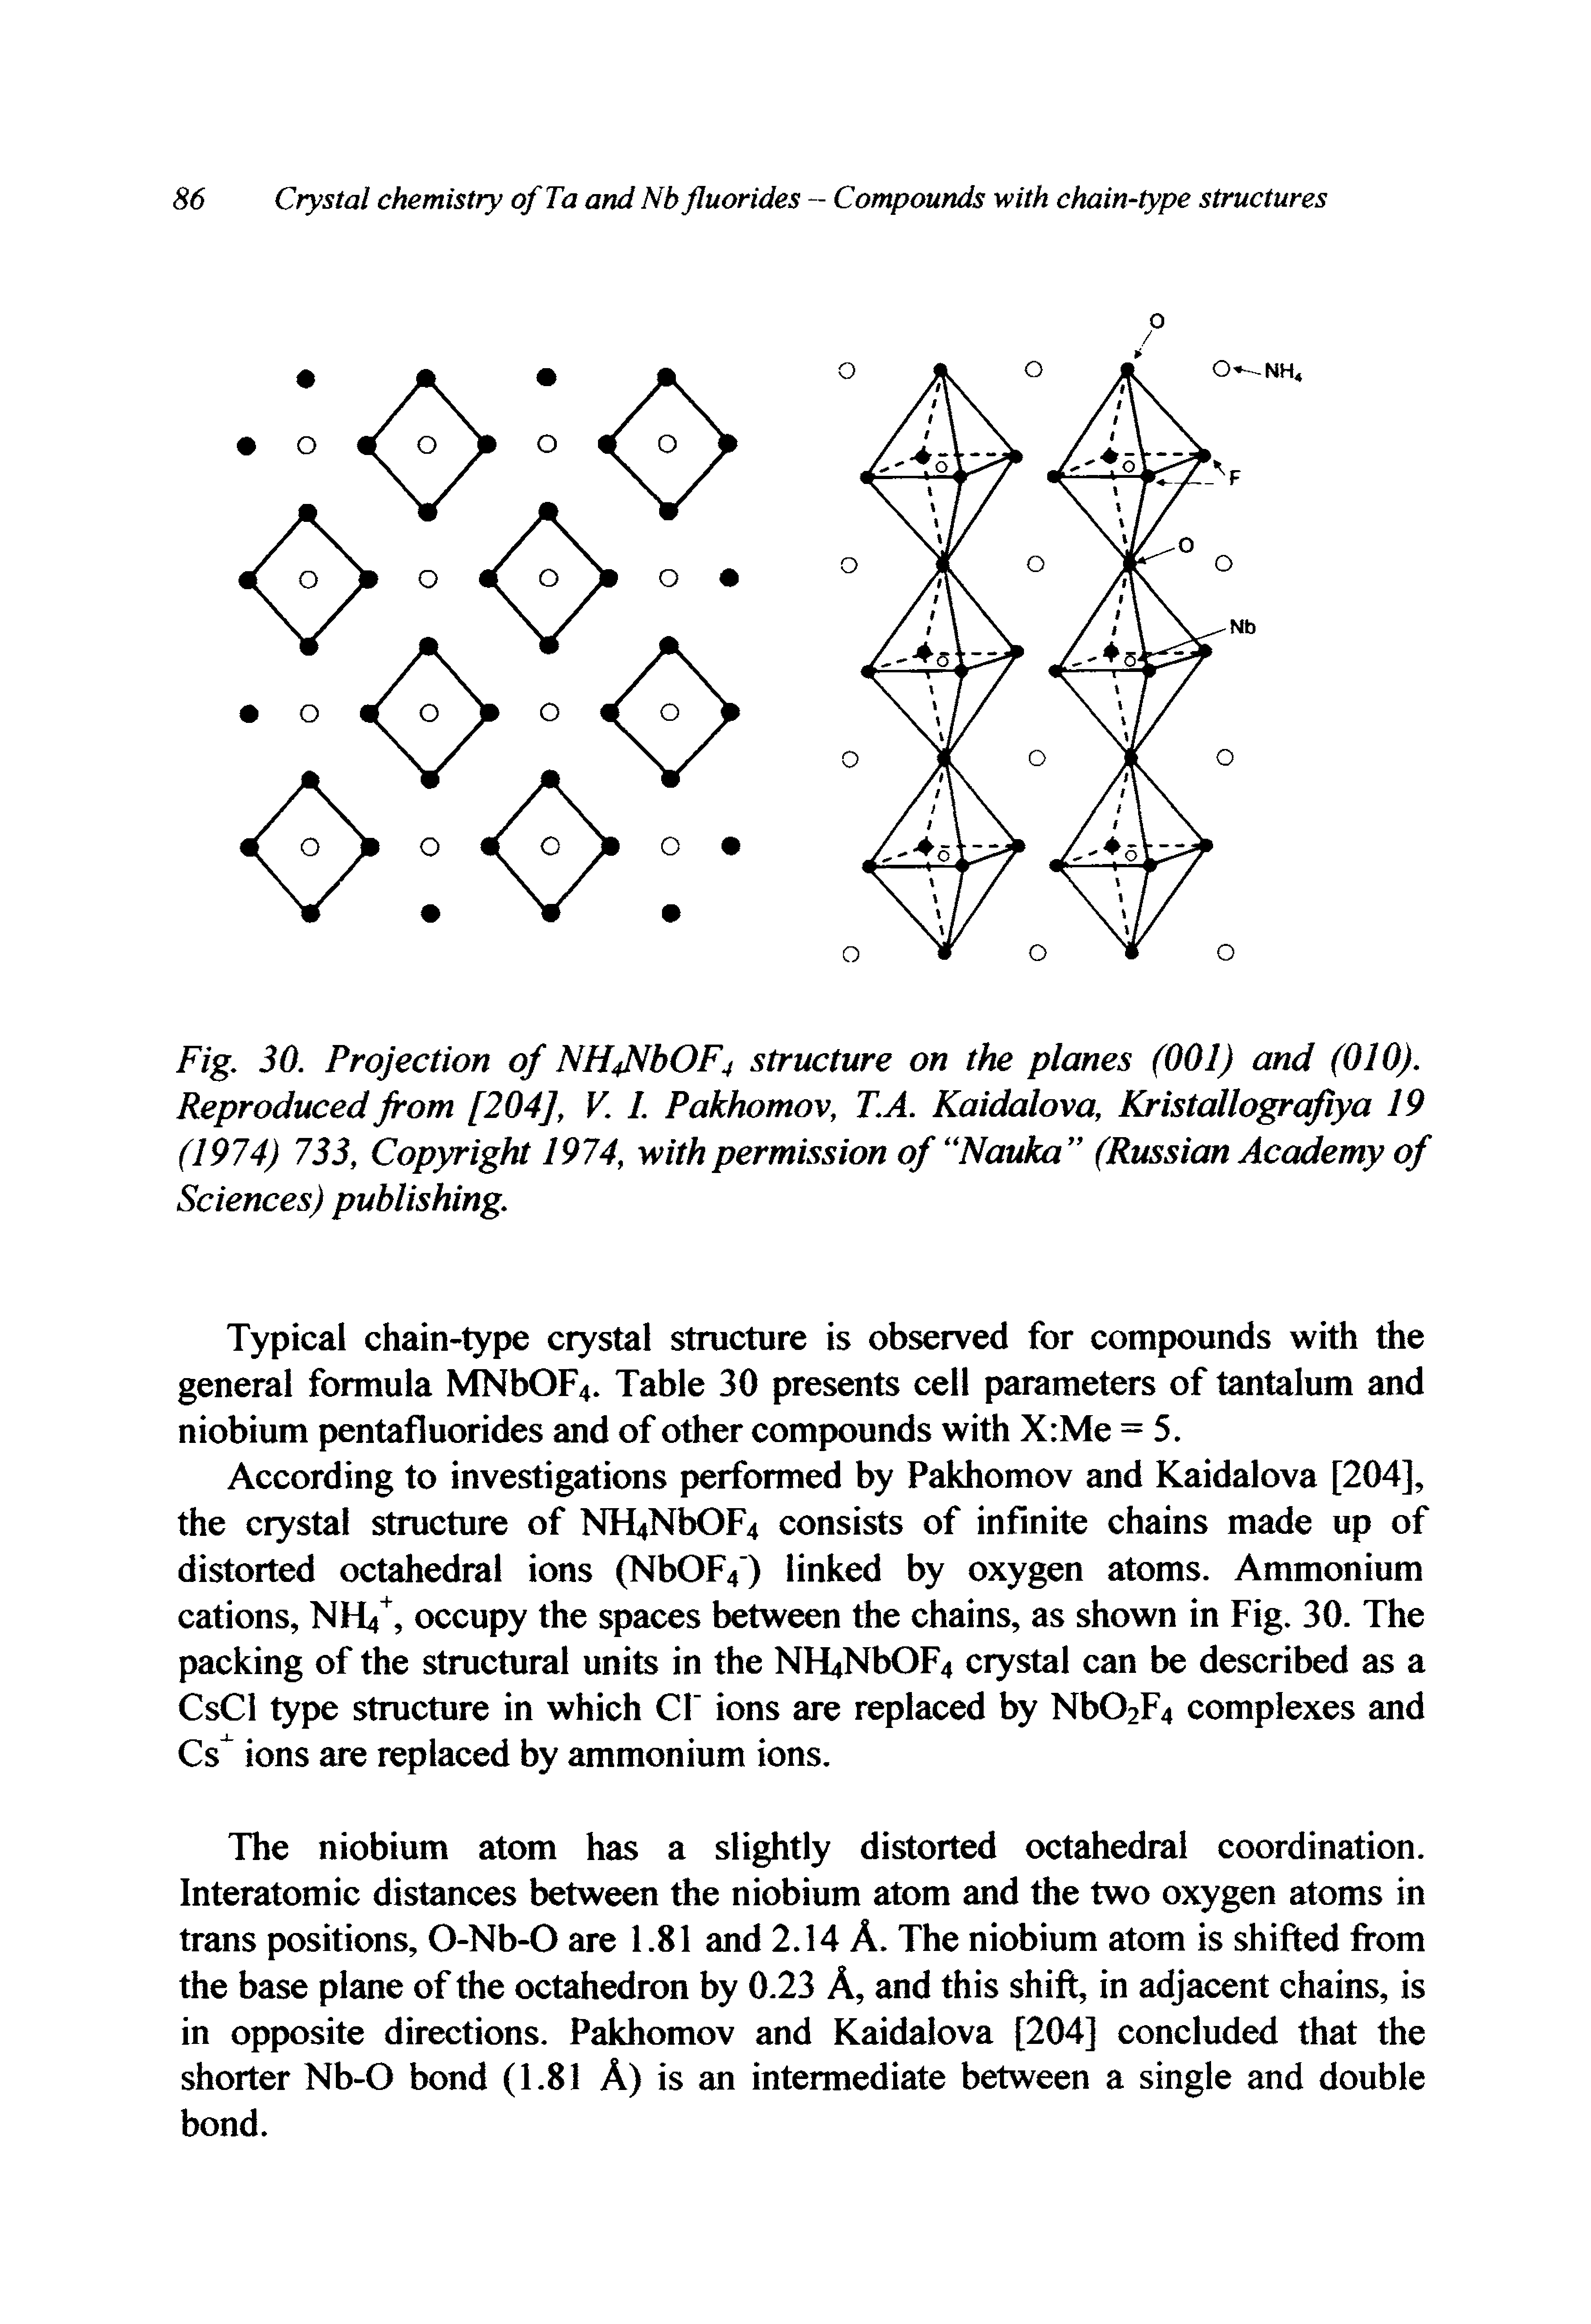 Fig. 30. Projection of NH4NbOF4 structure on the planes (001) and (010). Reproduced from [204], V. 1. Pakhomov, T.A. Kaidalova, Kristallografiya 19 (1974) 733, Copyright 1974, with permission of Nauka (Russian Academy of Sciences) publishing.